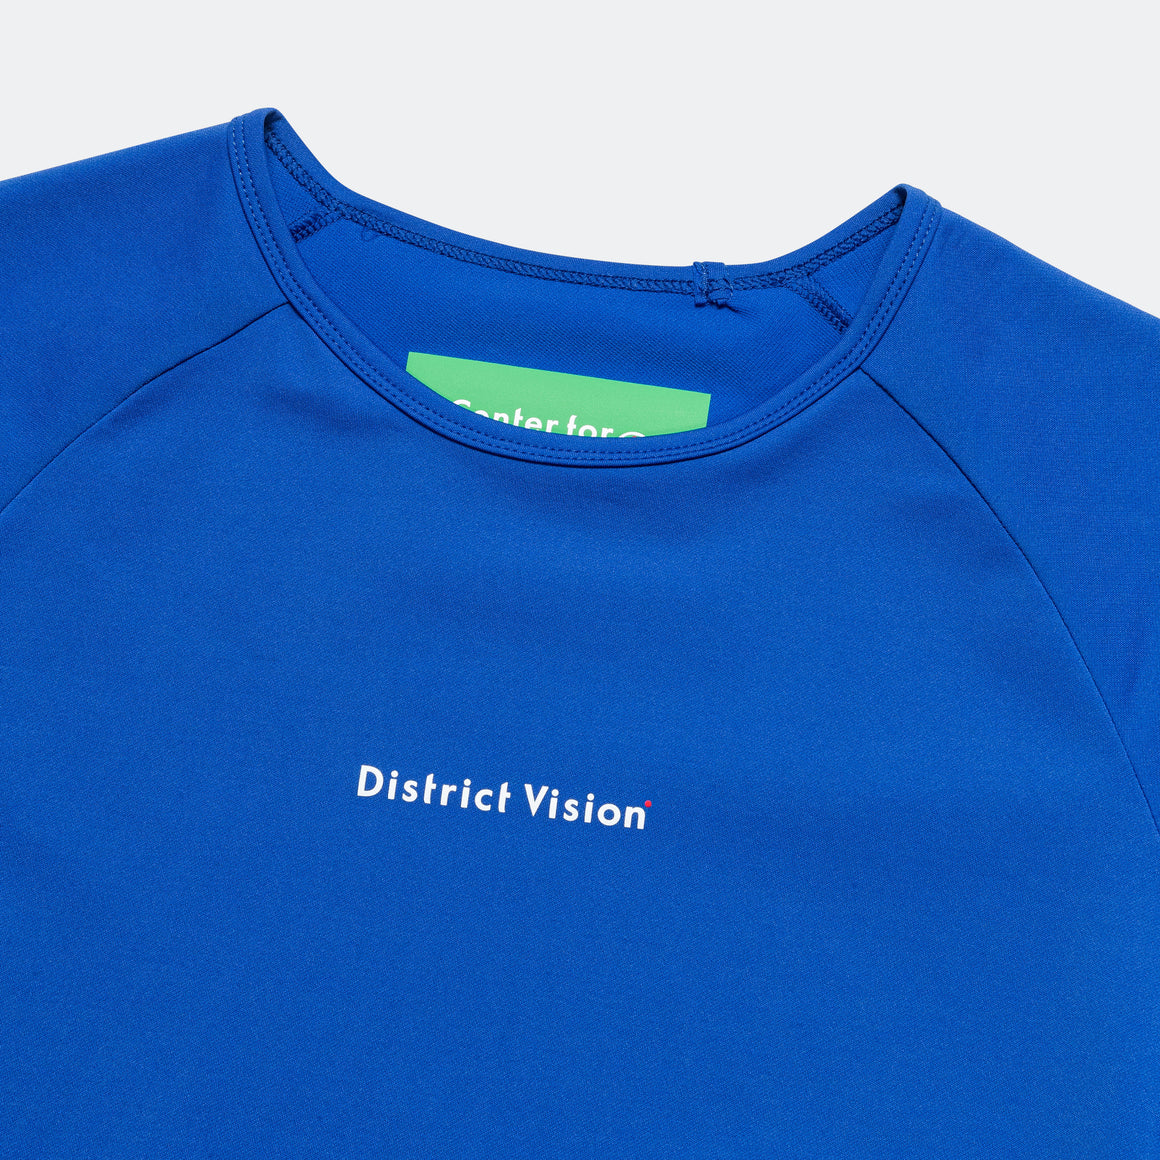 District Vision - Womens Lightweight Short Sleeve Fitted Tee - Surf Blue - Up There Athletics